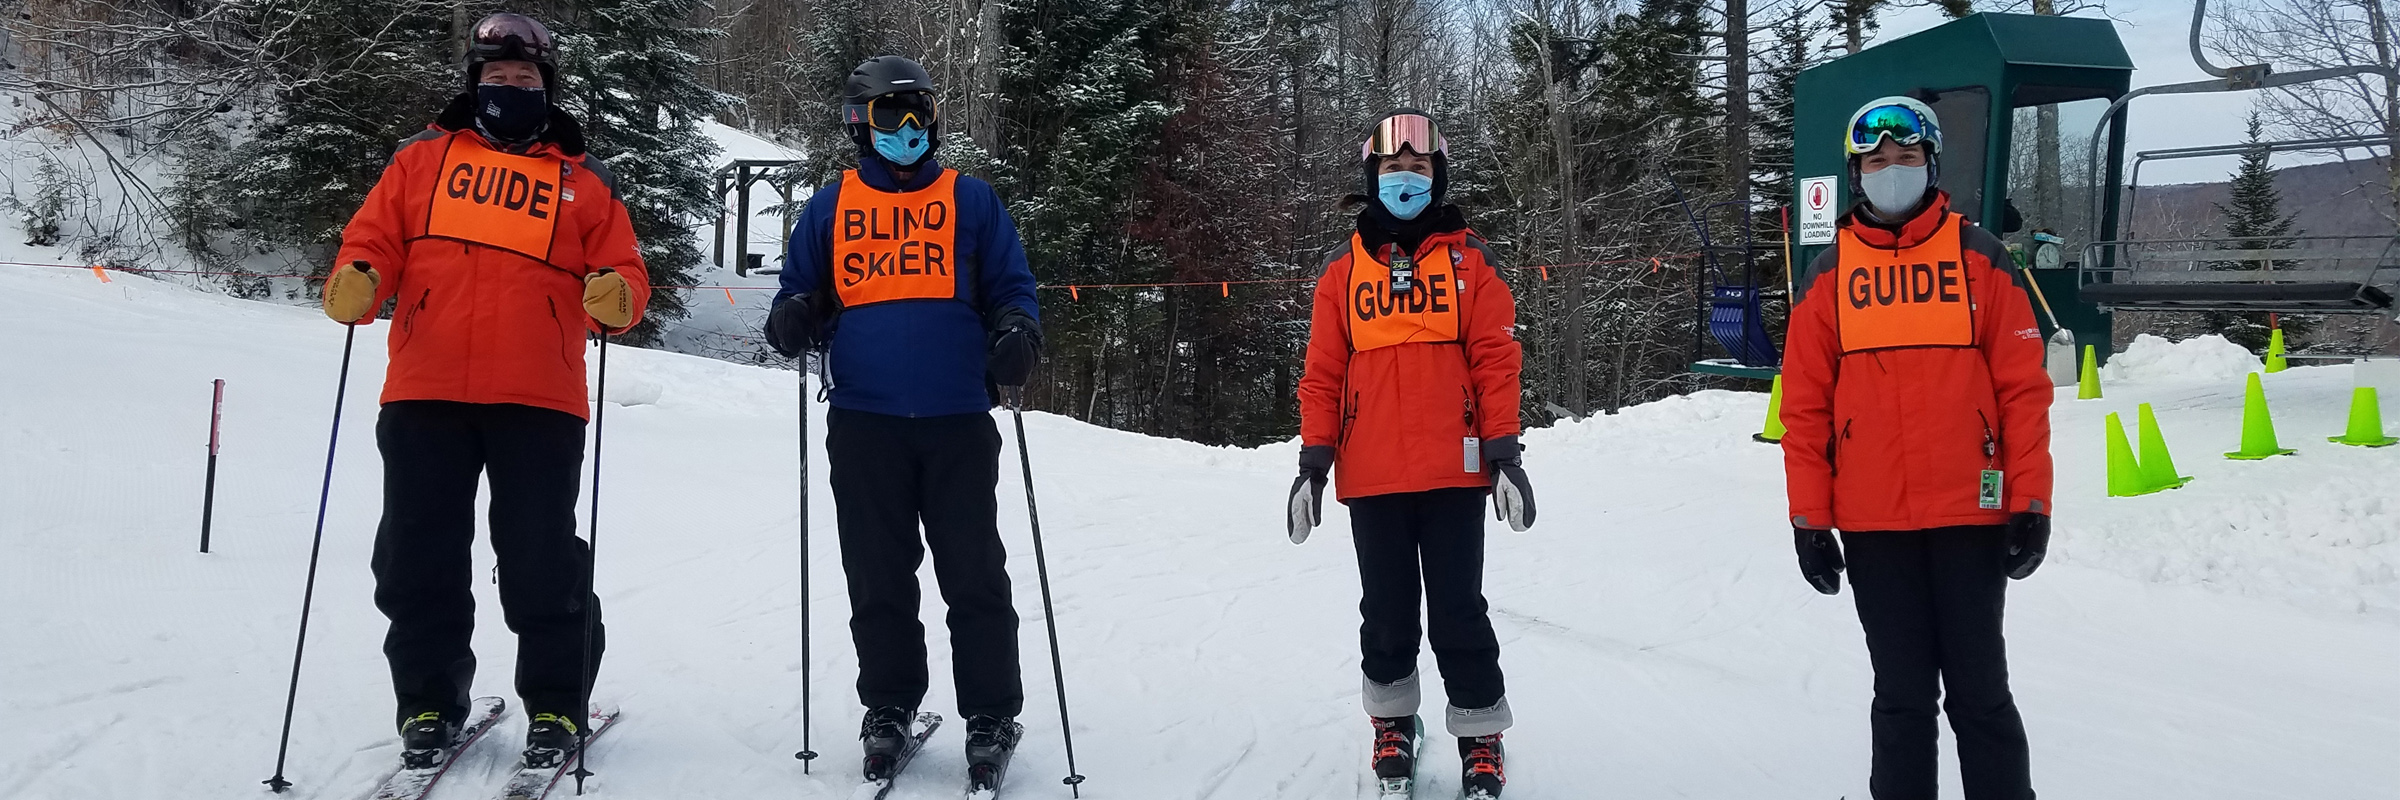 In this picture are 3 NEDS instructors all wearing orange jackets with an orange guide bib and a blind student wearing a blue jacket and an orange blind skier bib. This was during COVID, so each person is wearing a mask.